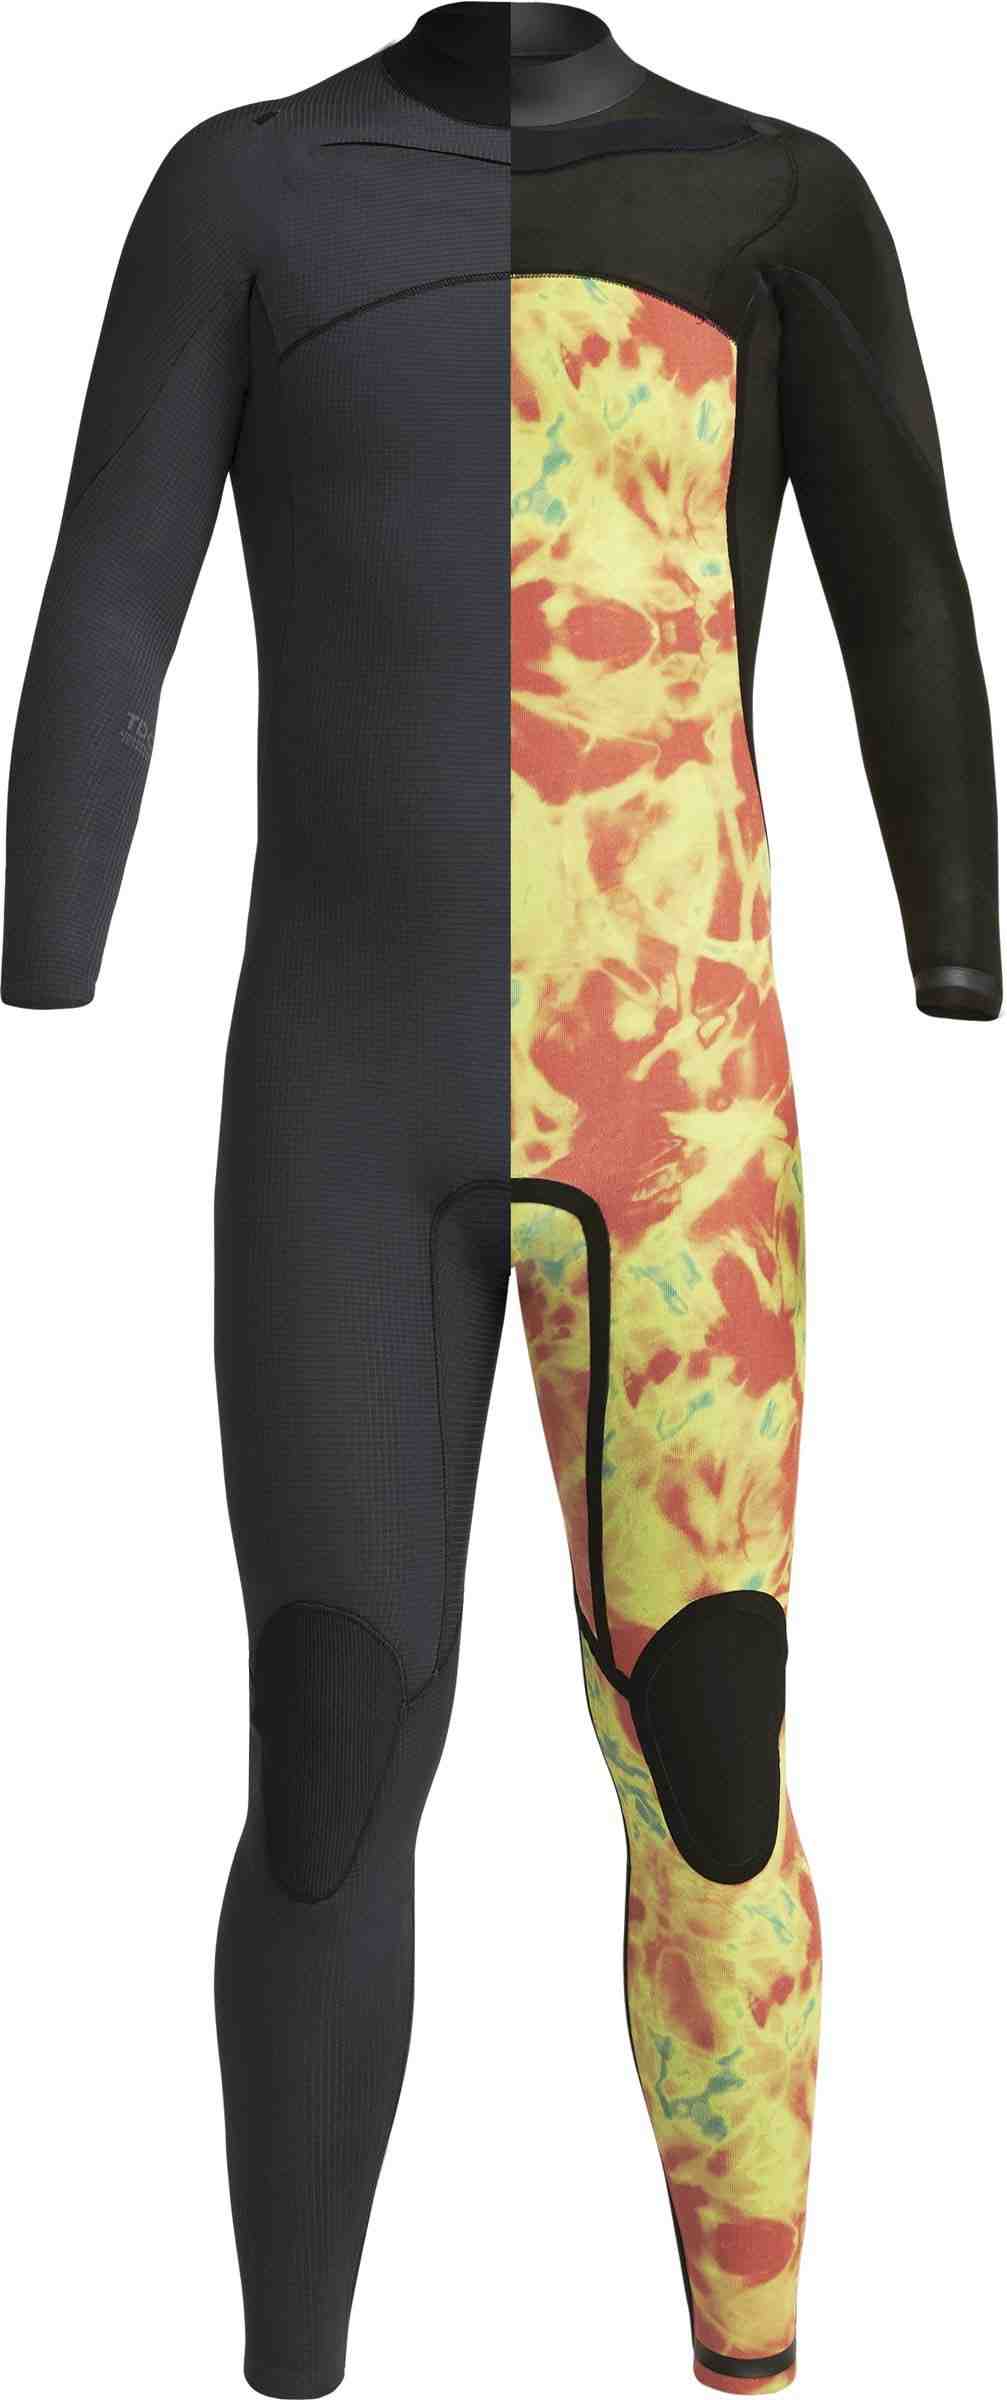 Are Xcel wetsuits any good?